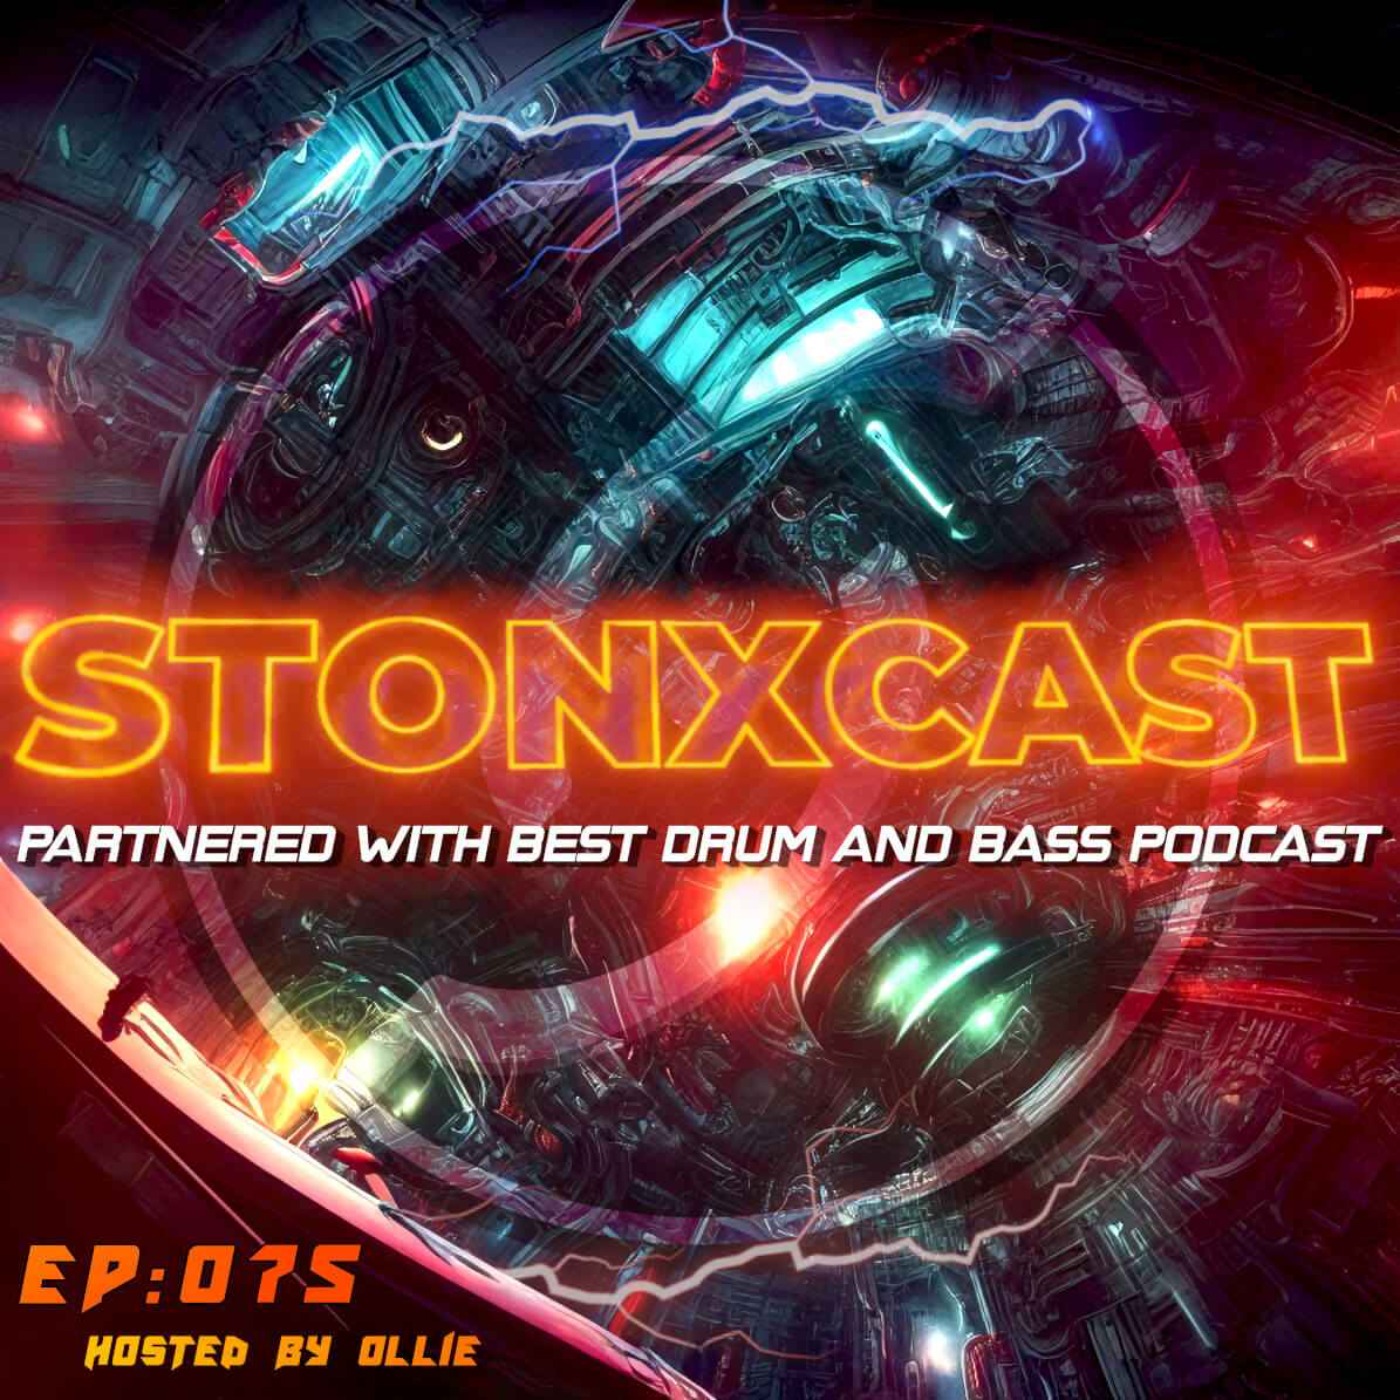 Stonxcast EP:075 - Hosted by Ollie Artwork